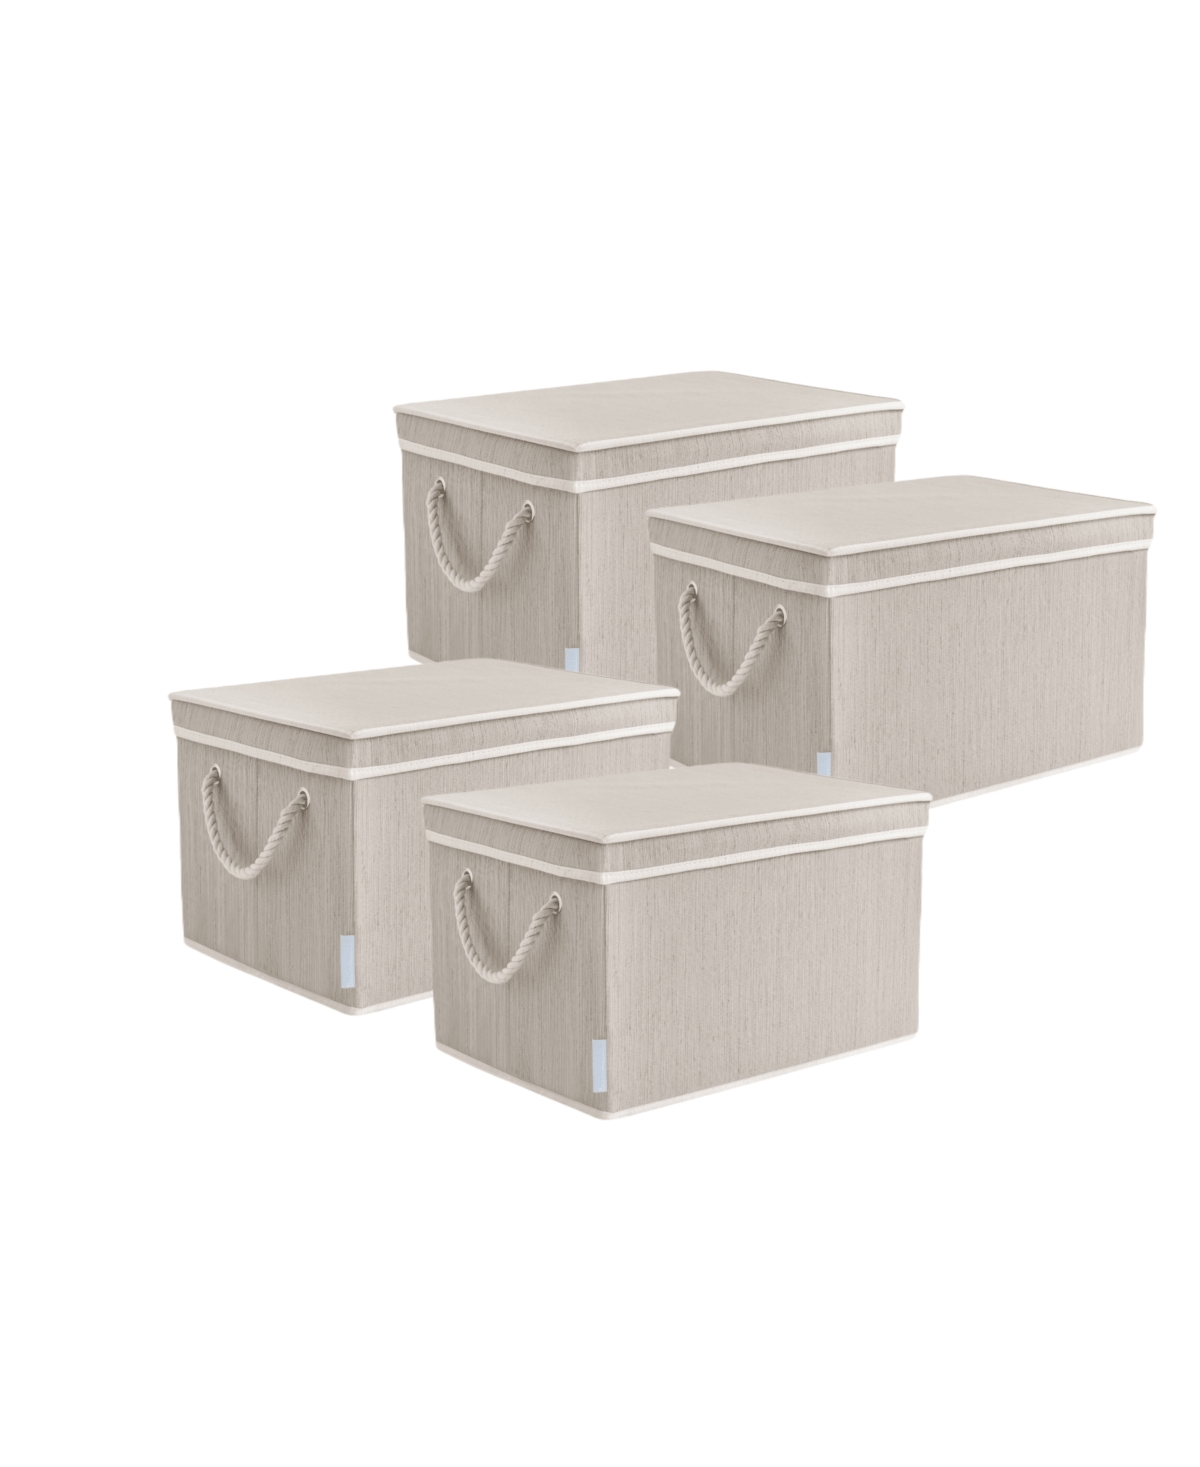 Wethinkstorage 34 Litre Collapsible Fabric Storage Bins With Lids And Cotton Rope Handles, Set Of 4 In Clay